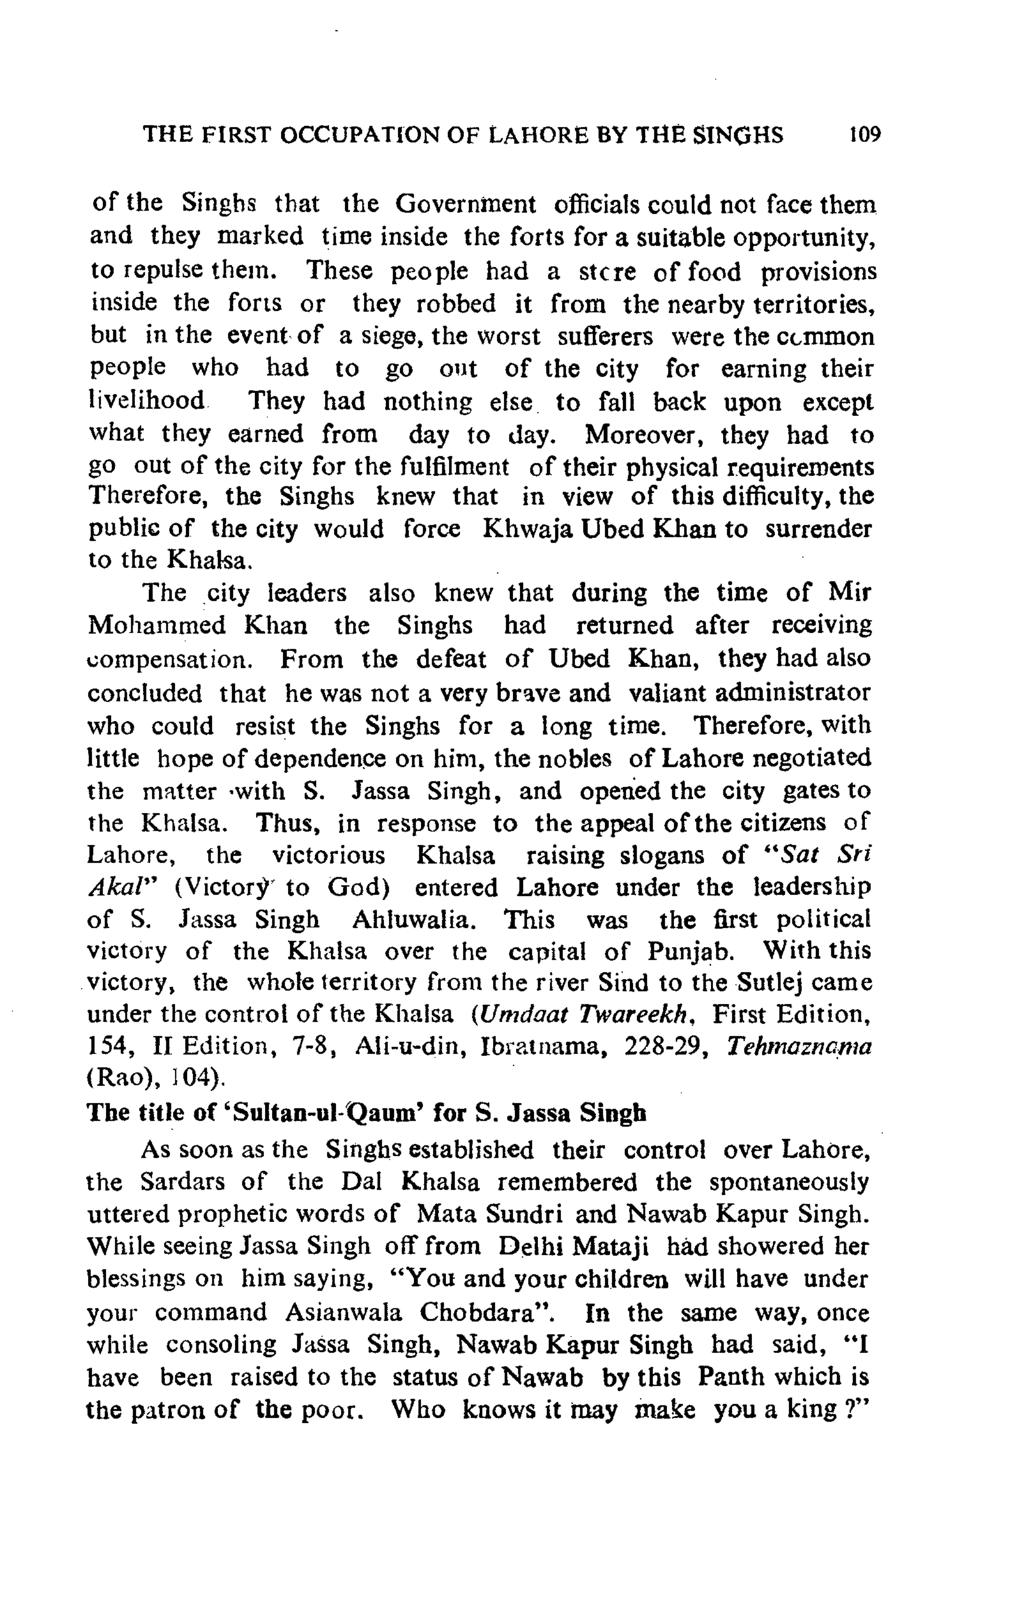 THE FIRST OCCUPAnON OF LAHORE BY THE SINOHS 109 of the Singhs that the Government officials could not face them and they marked time inside the forts for a suitable opportunity, to repulse them.